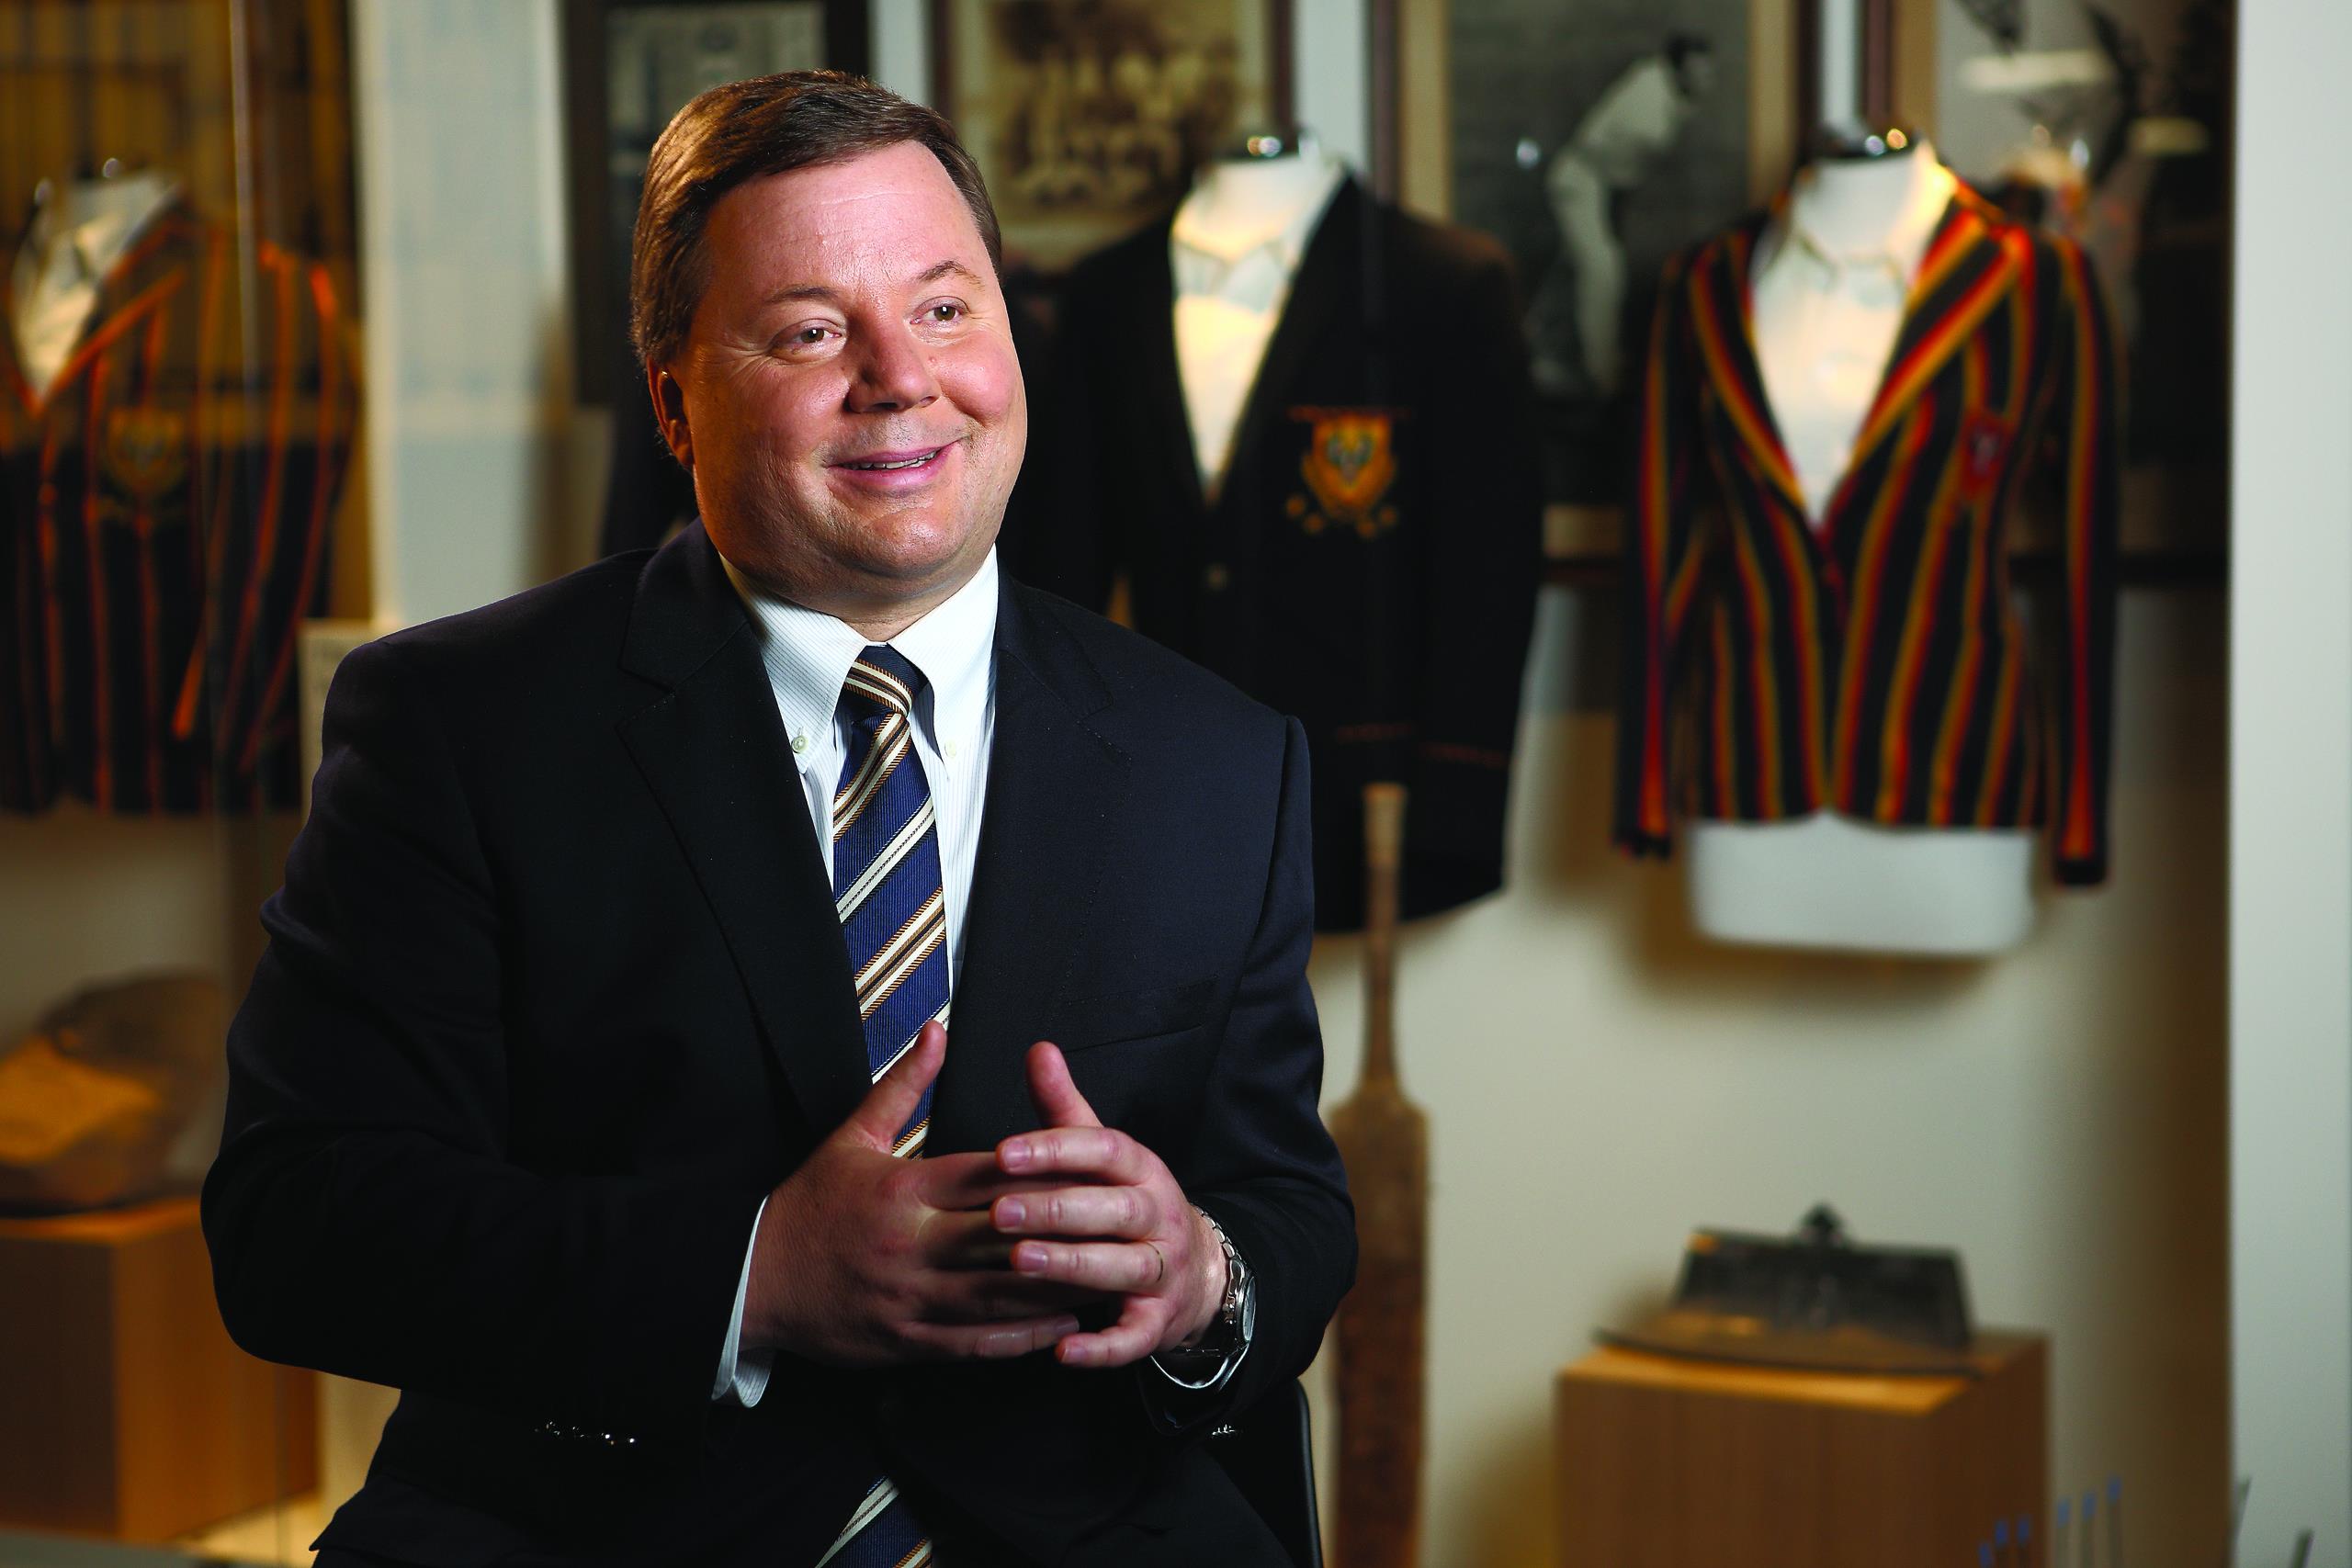 Andrew Daniels, managing director of the Adelaide Oval